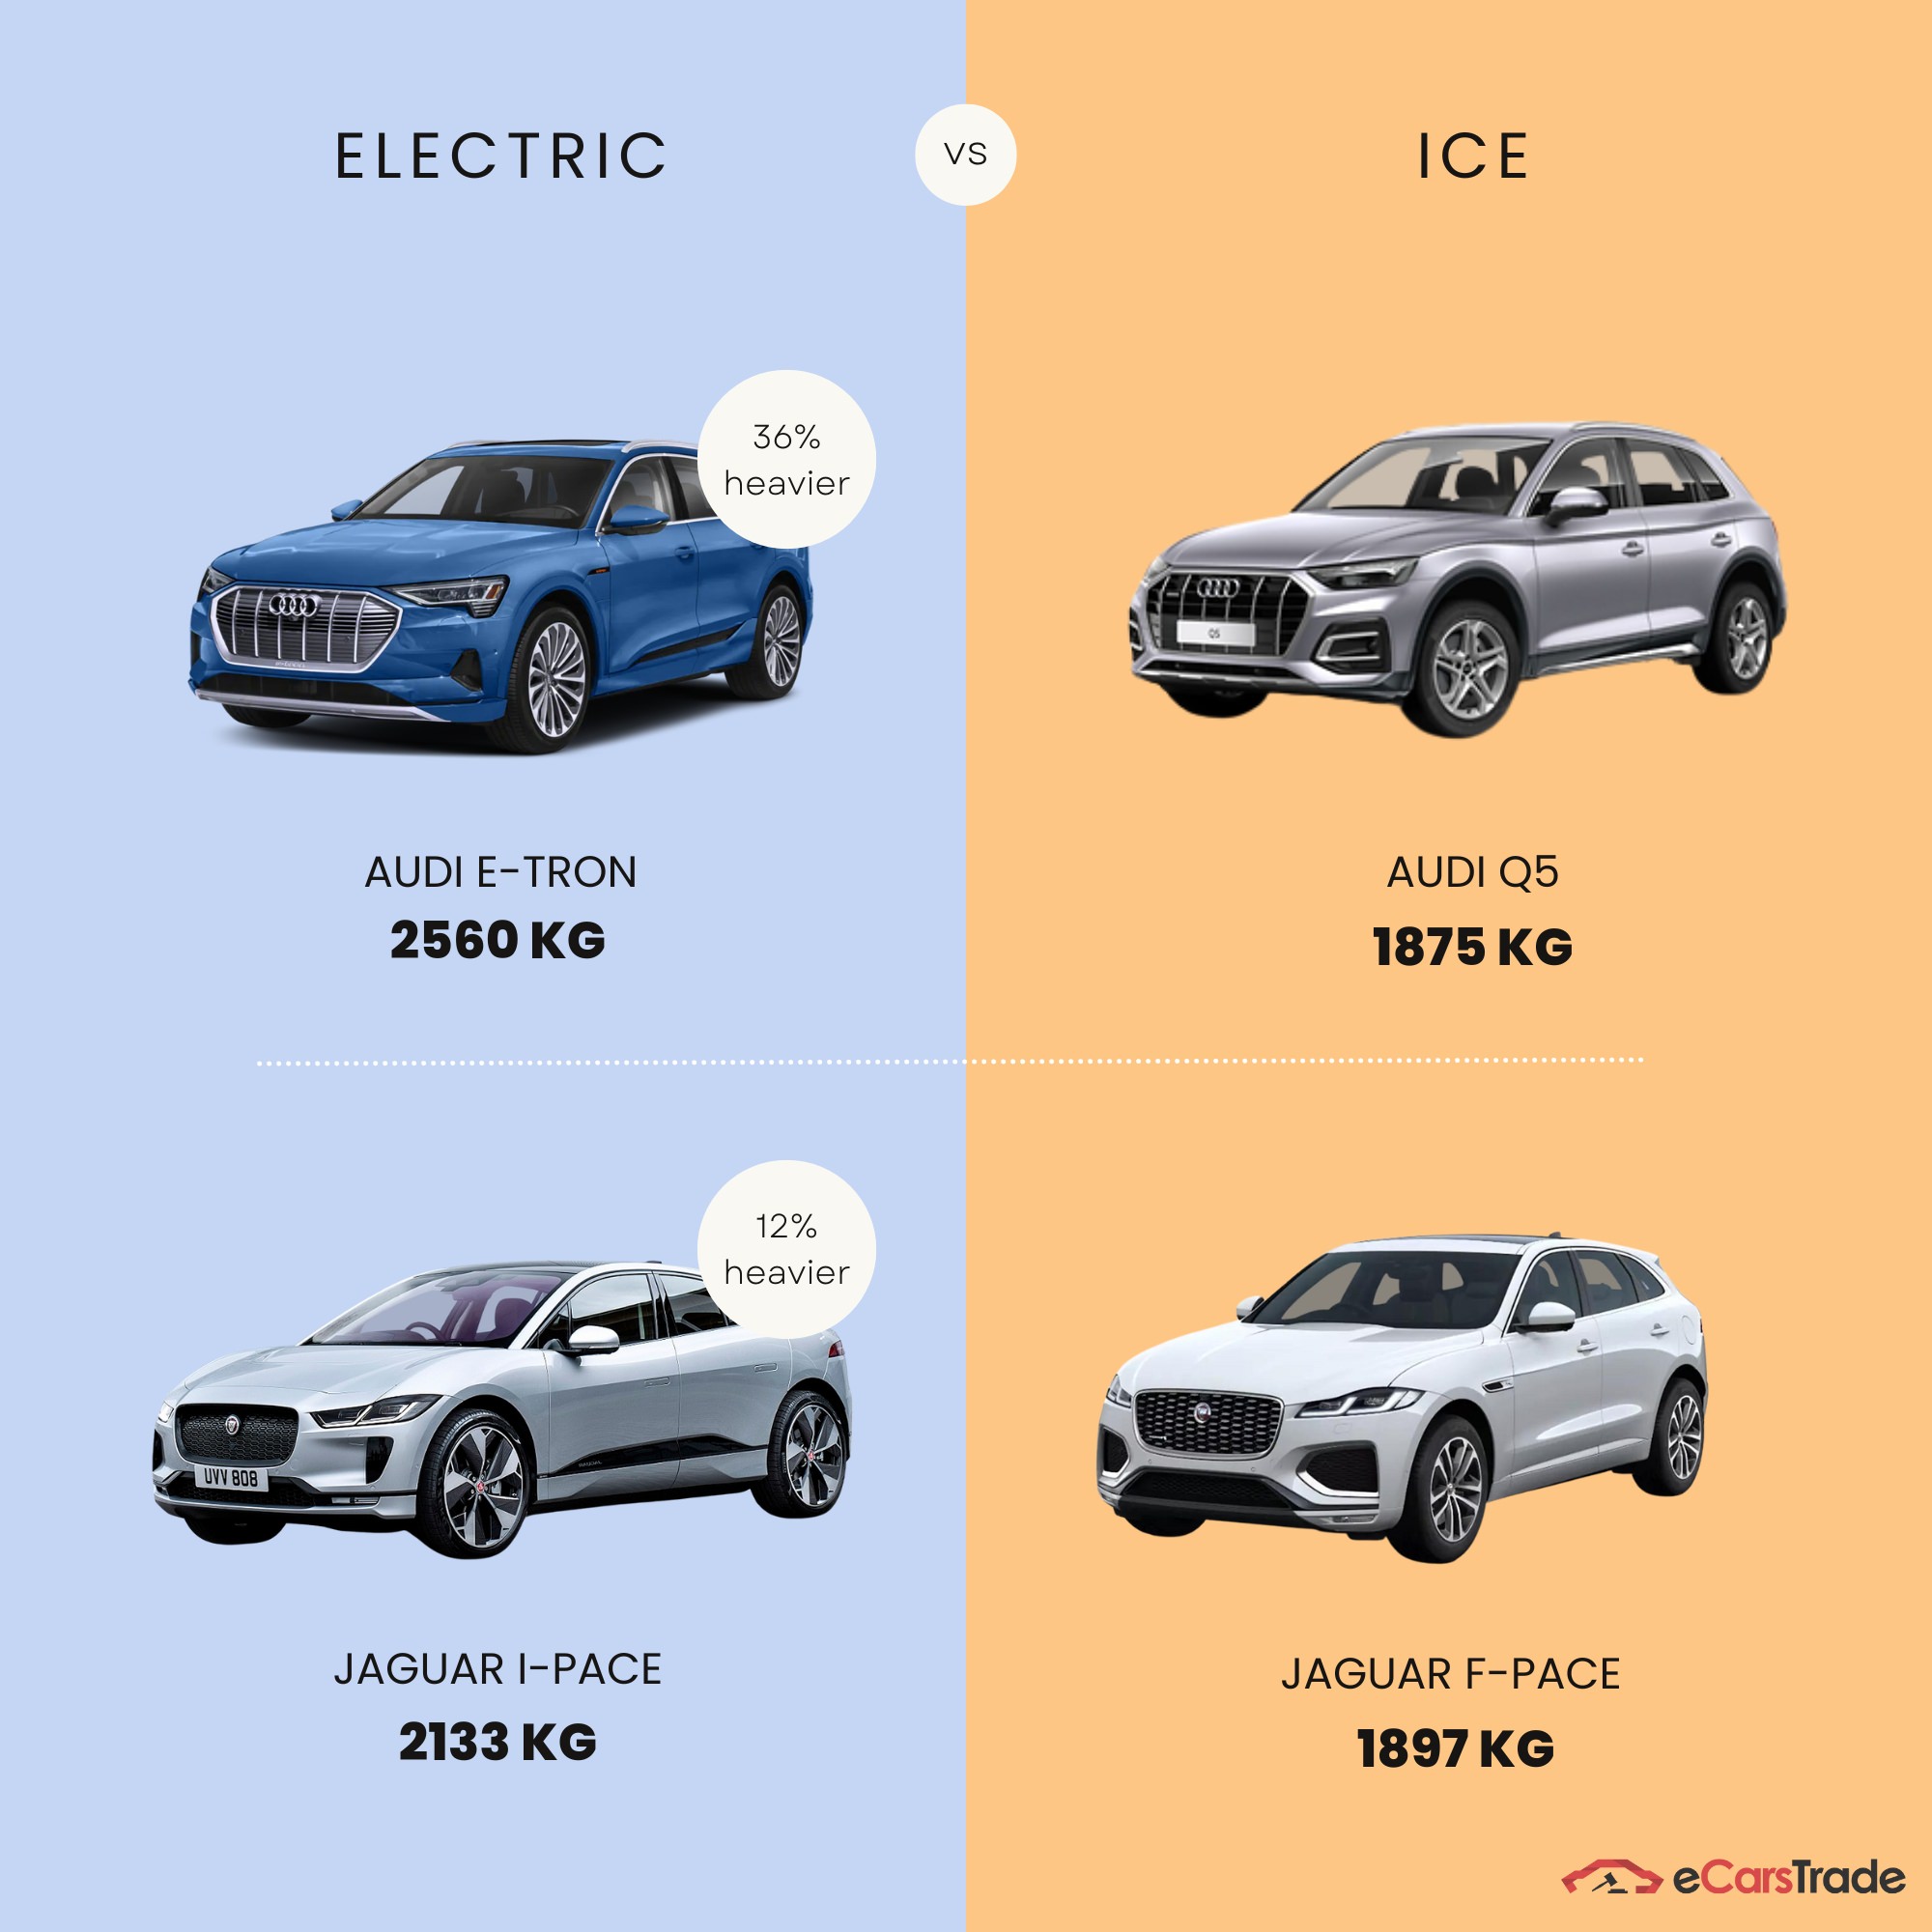 infographic showing the weight difference between electric and ICE vehicles